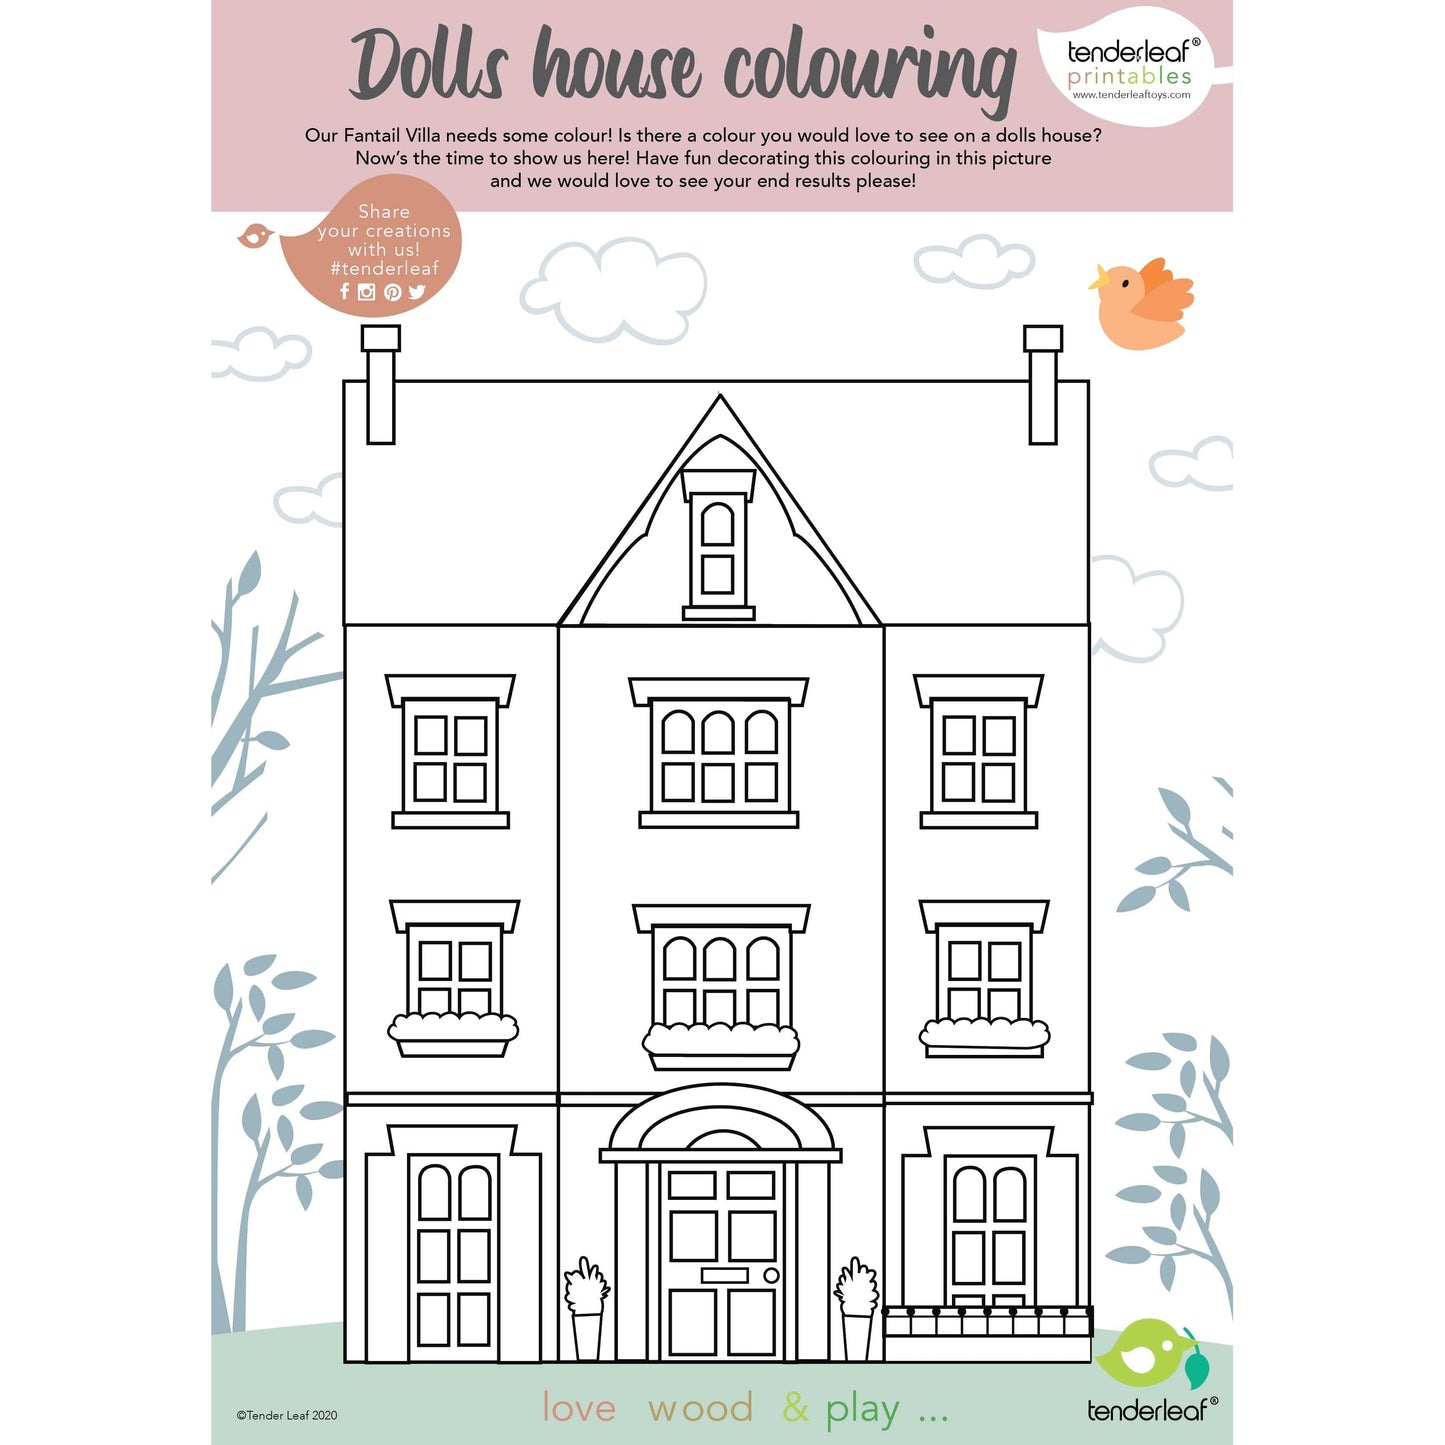 Tender Leaf Fantail Hall Deluxe Wooden Dolls House colouring sheet